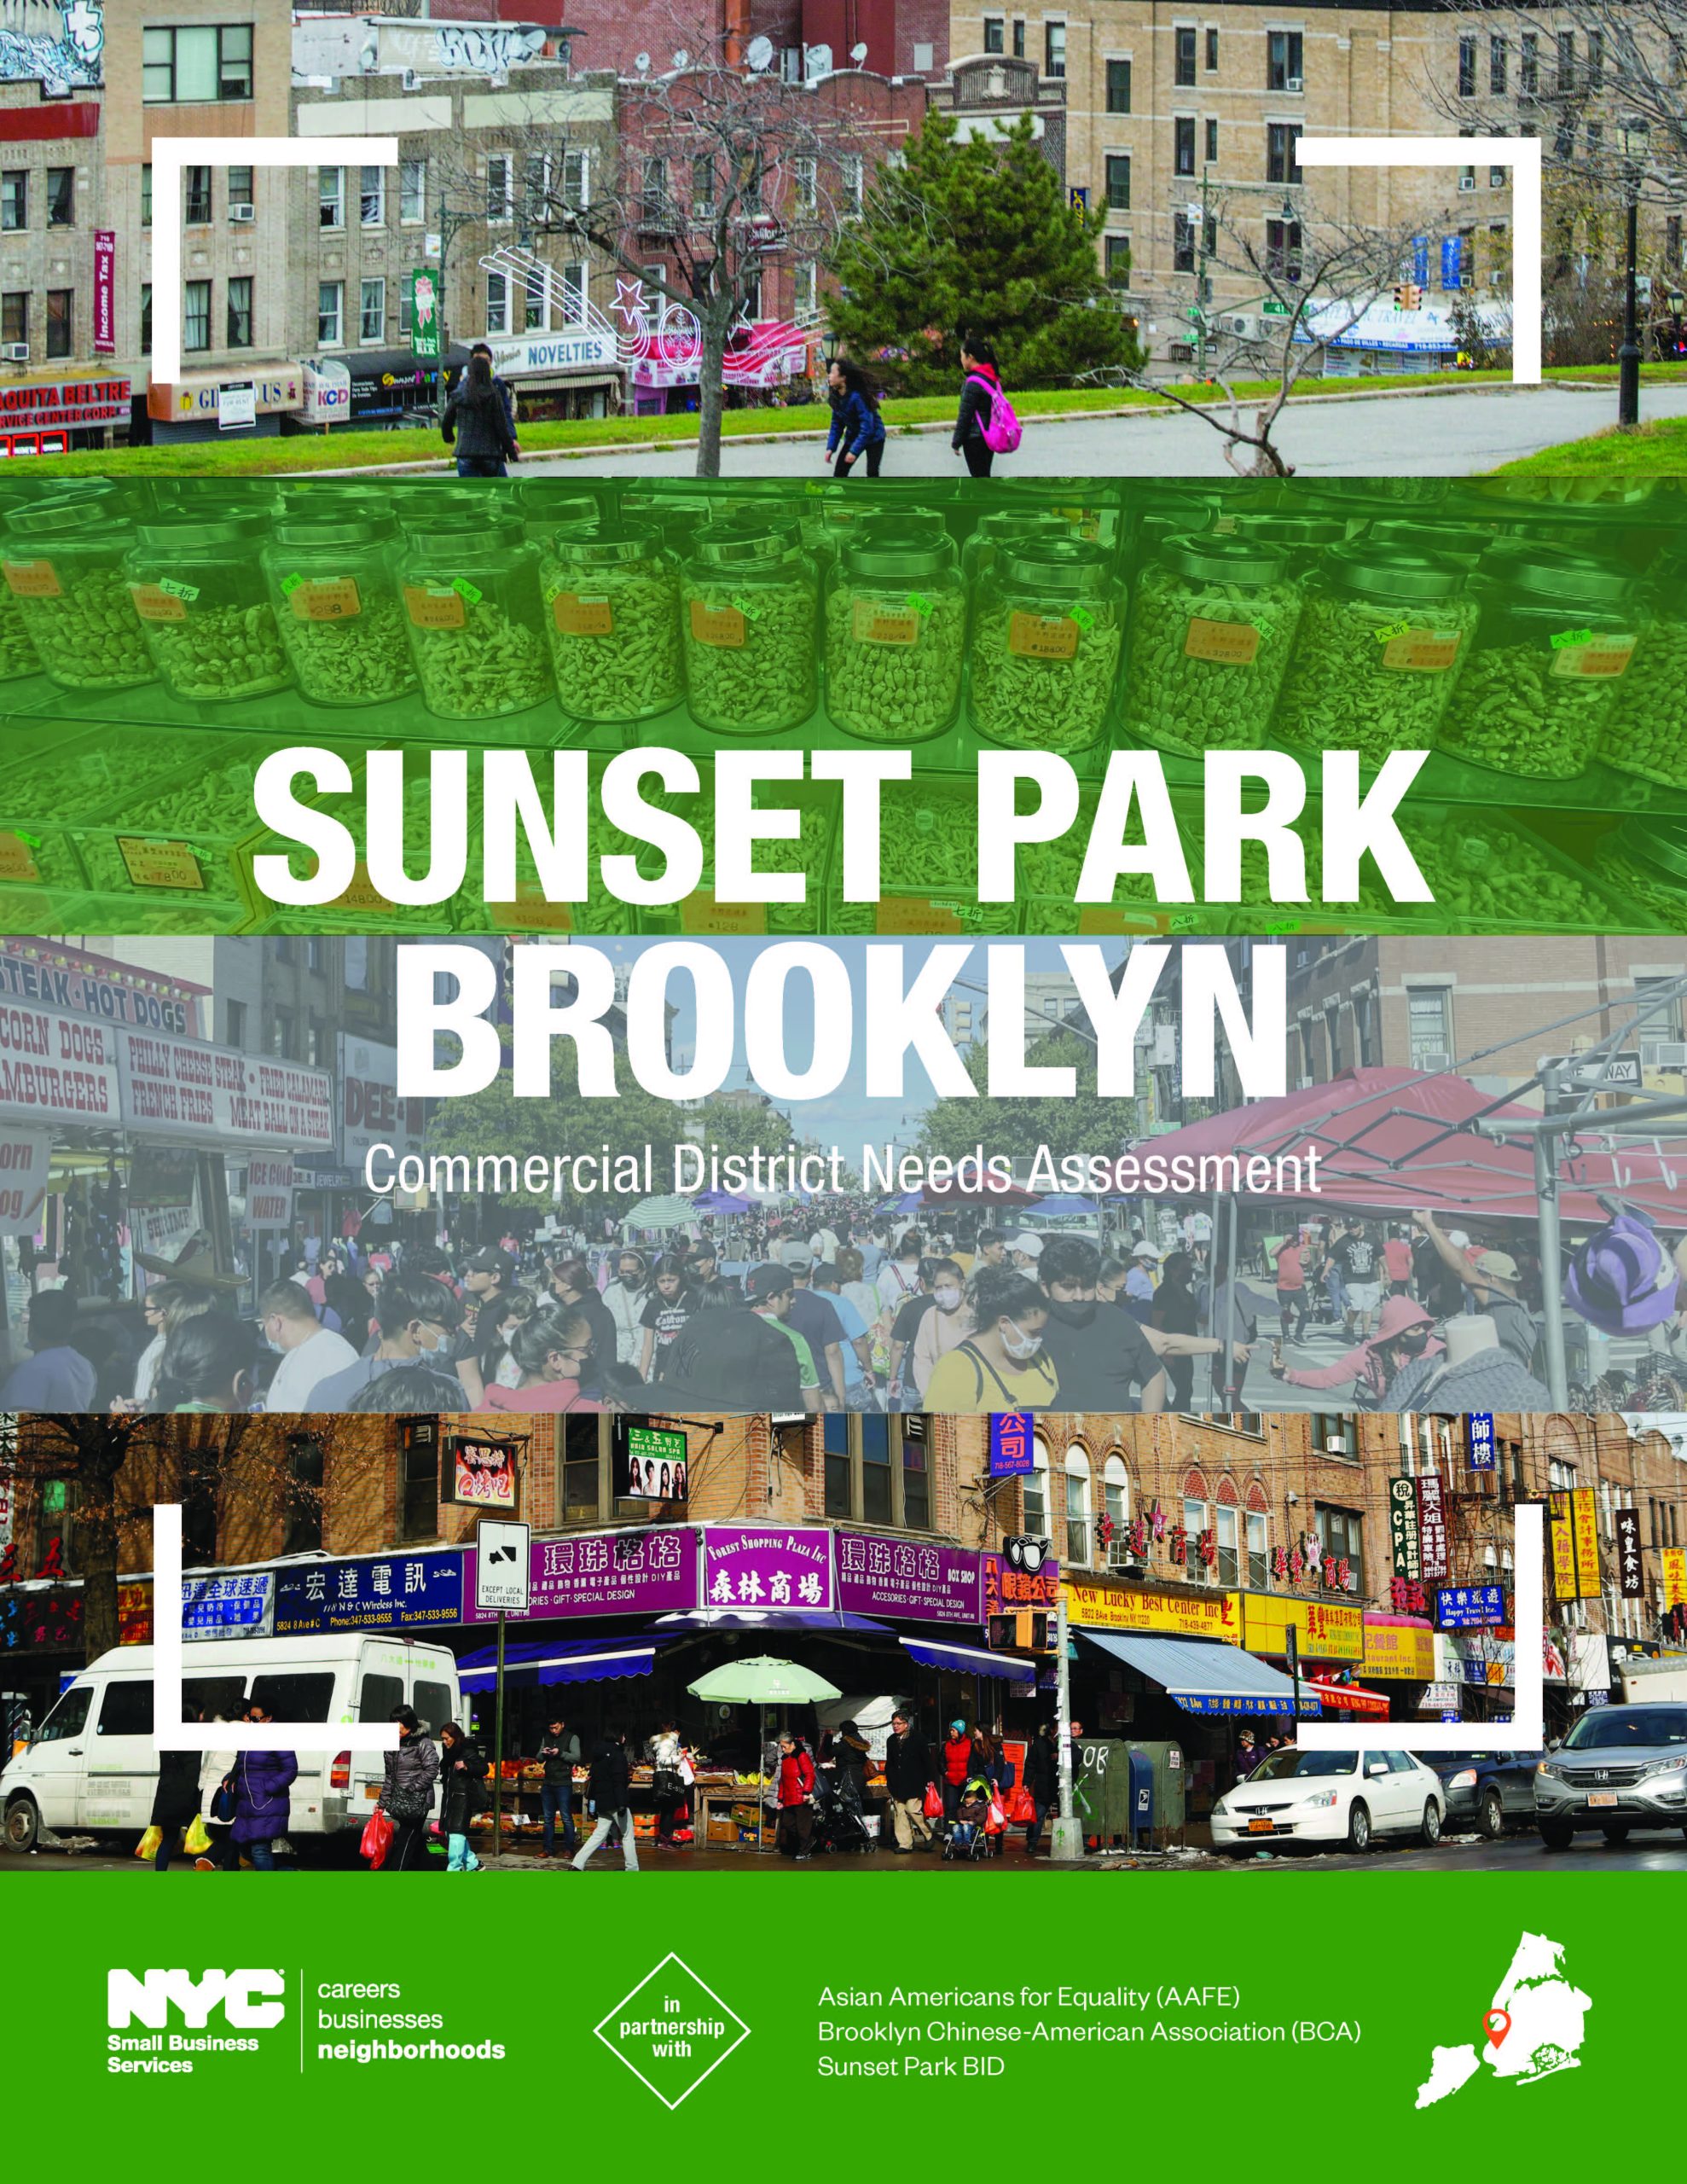 Poster for sunset park, brooklyn showing a collage of neighborhood scenes including people, businesses, and landmarks, titled "commercial district needs assessment.